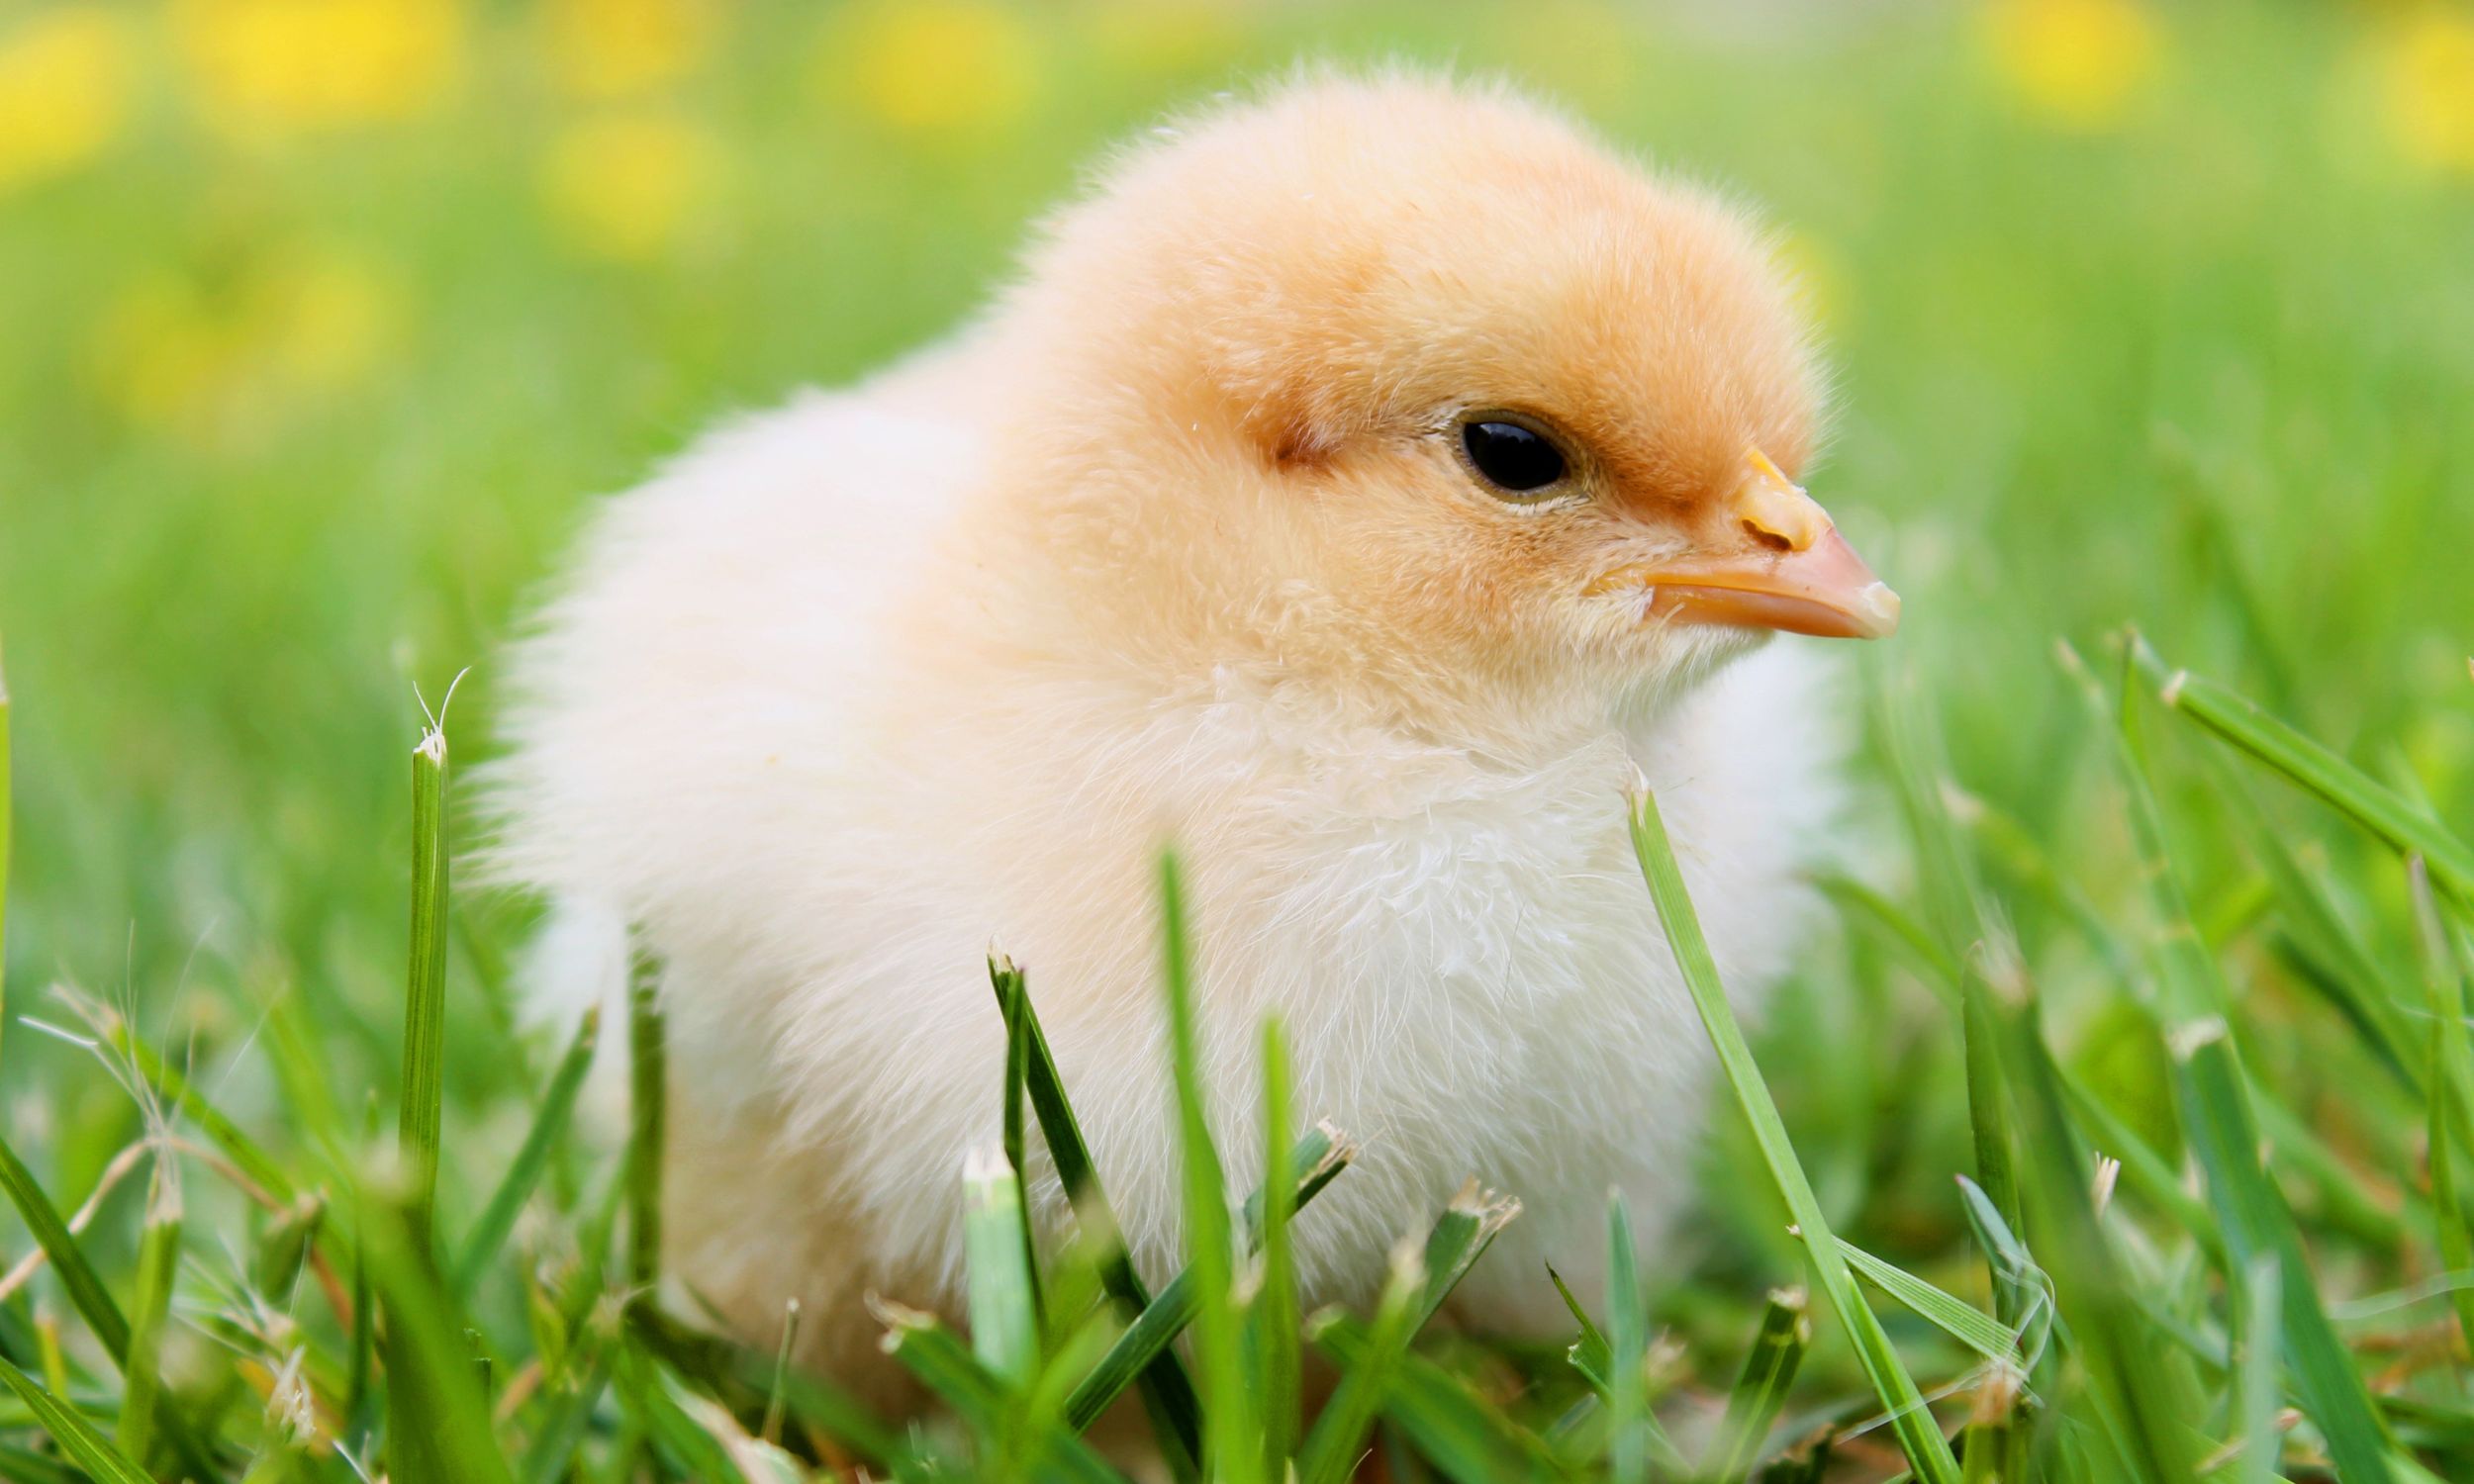 Tips for Raising Healthy, Happy Baby Chicks